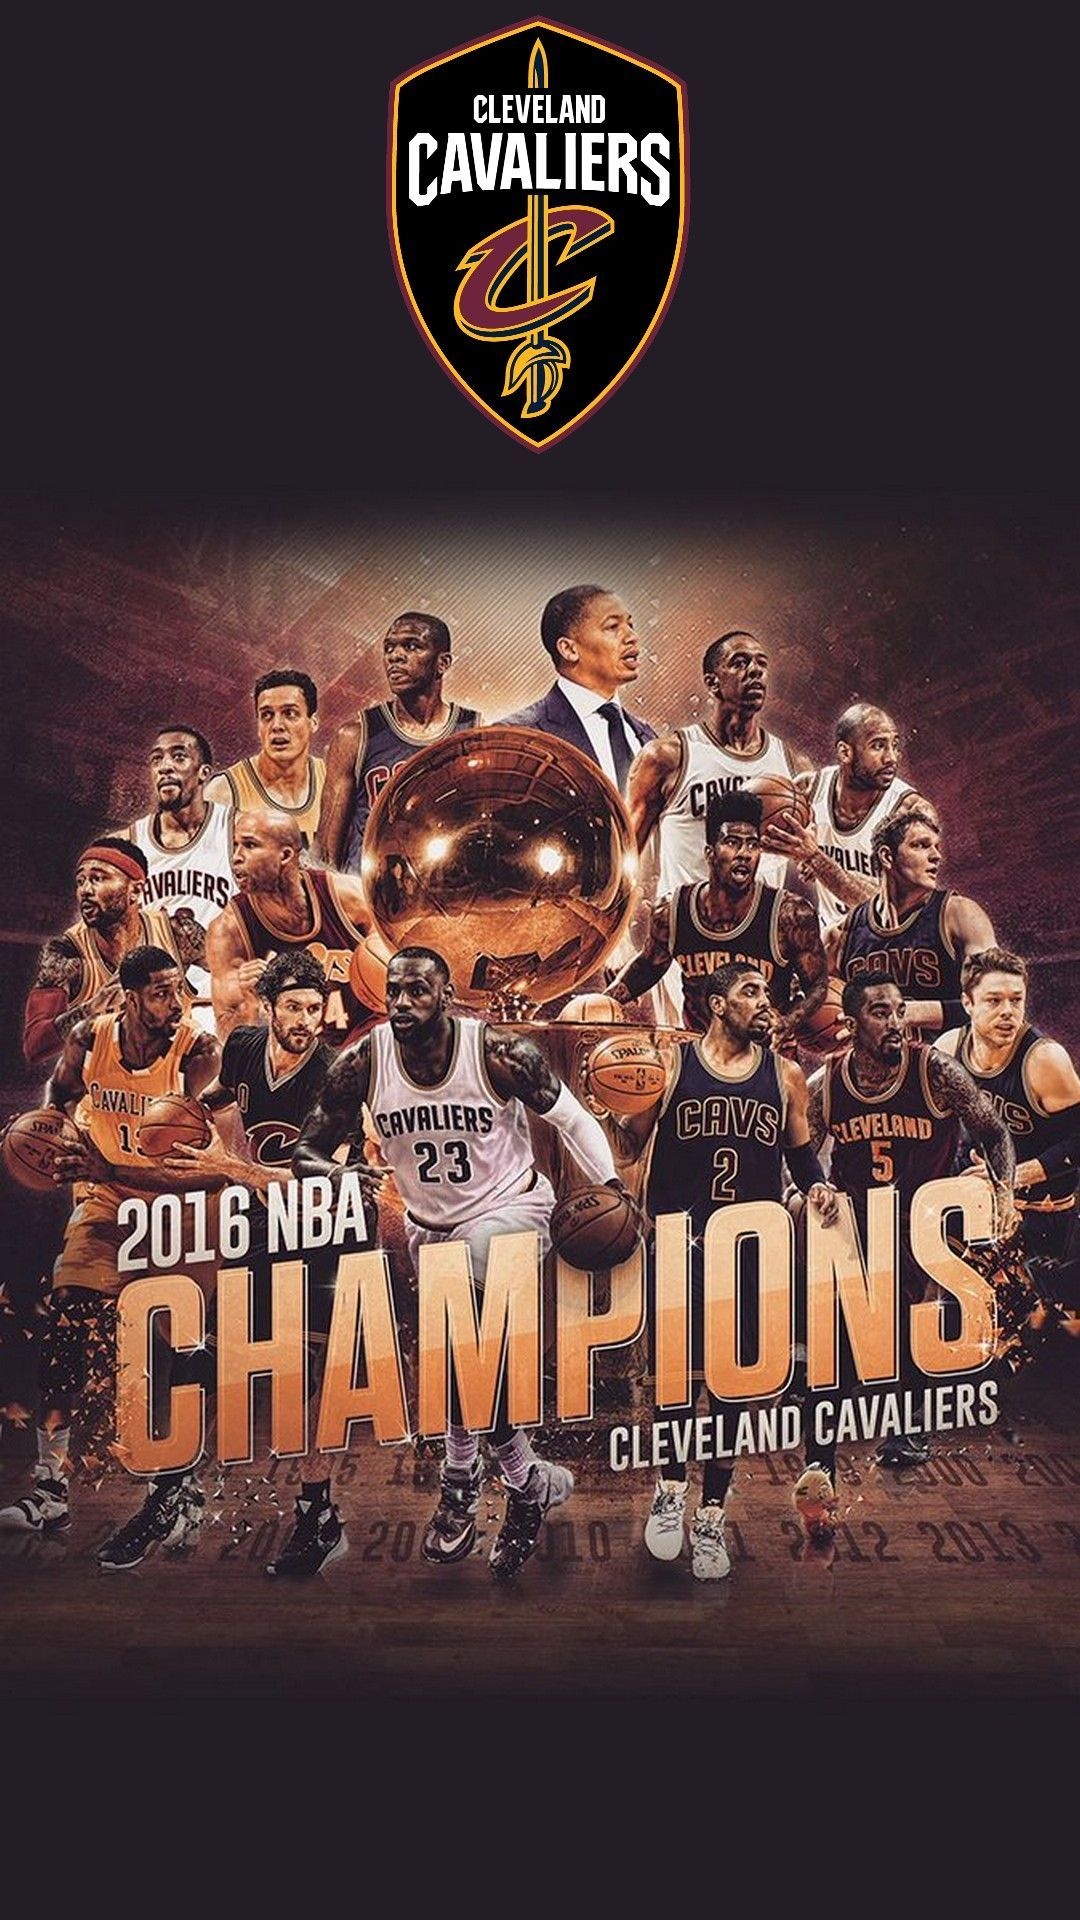 Cleveland Cavaliers: Achieved the victory in The 2016 NBA Finals against the Golden State Warriors. 1080x1920 Full HD Wallpaper.